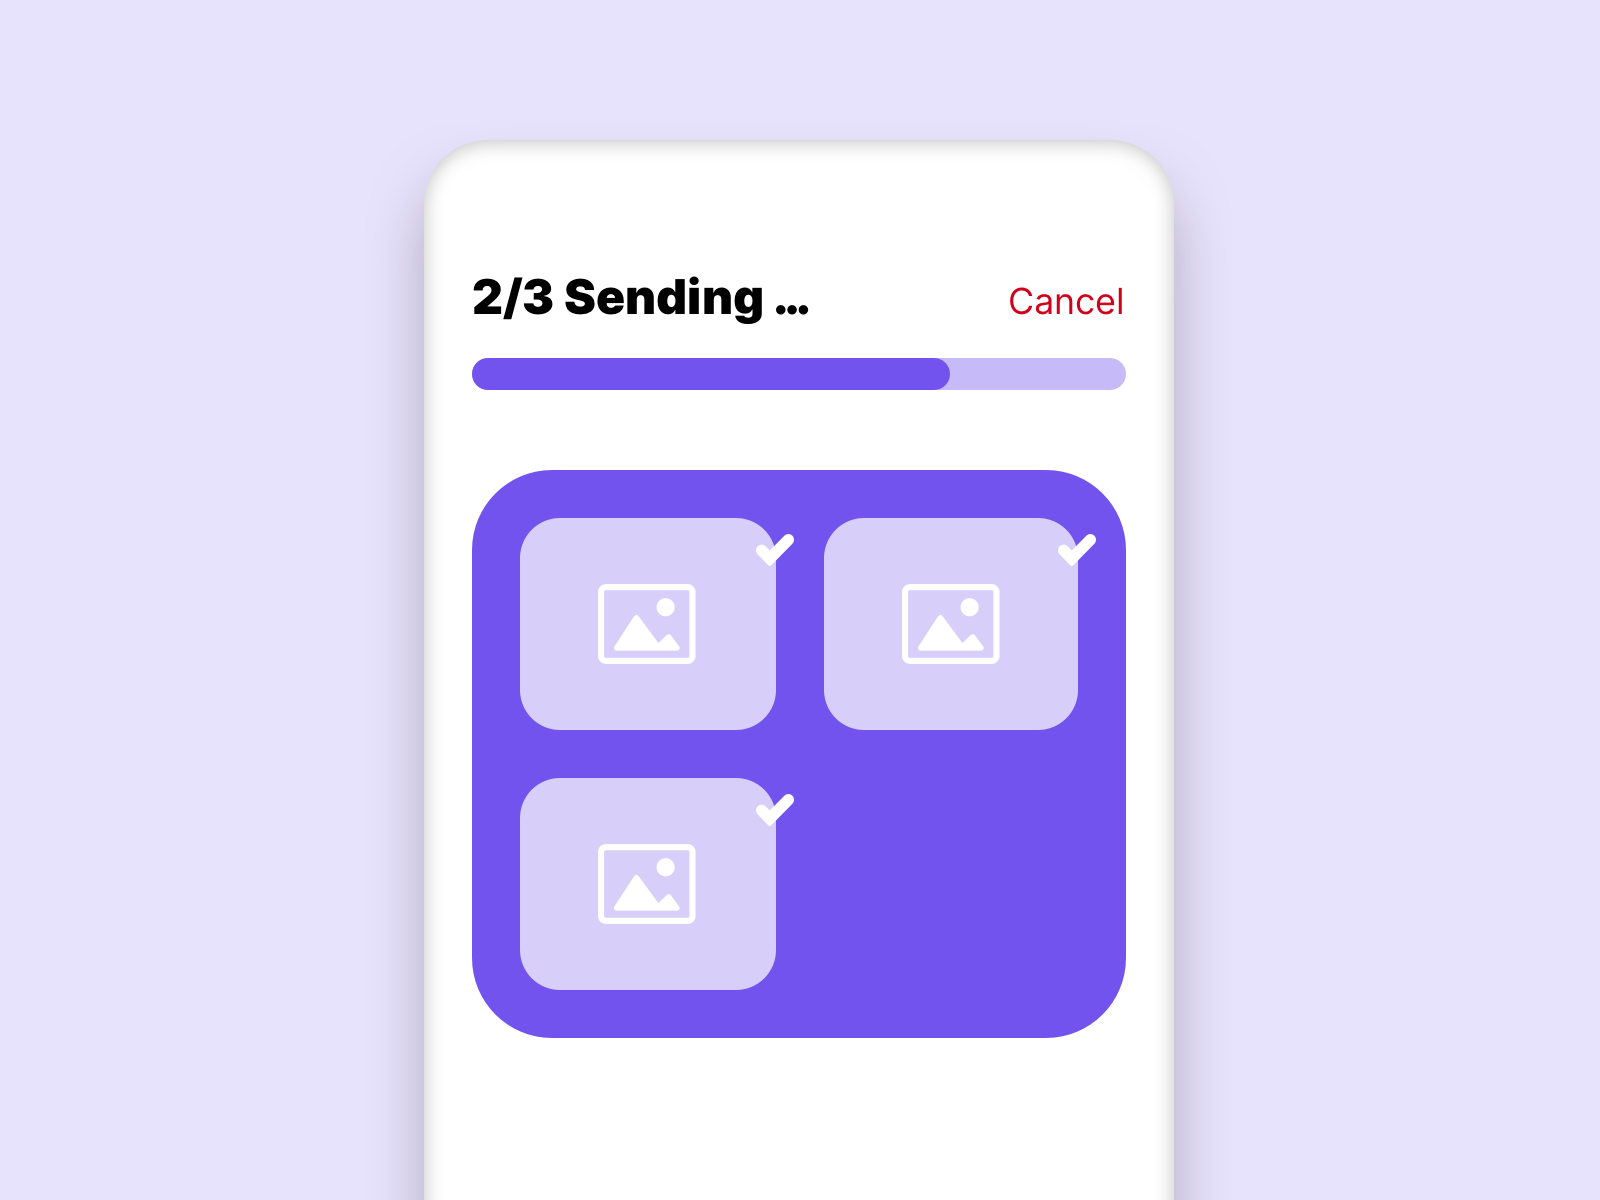 Picture of a sending process on a mobile phone, which shows the progress in the ui